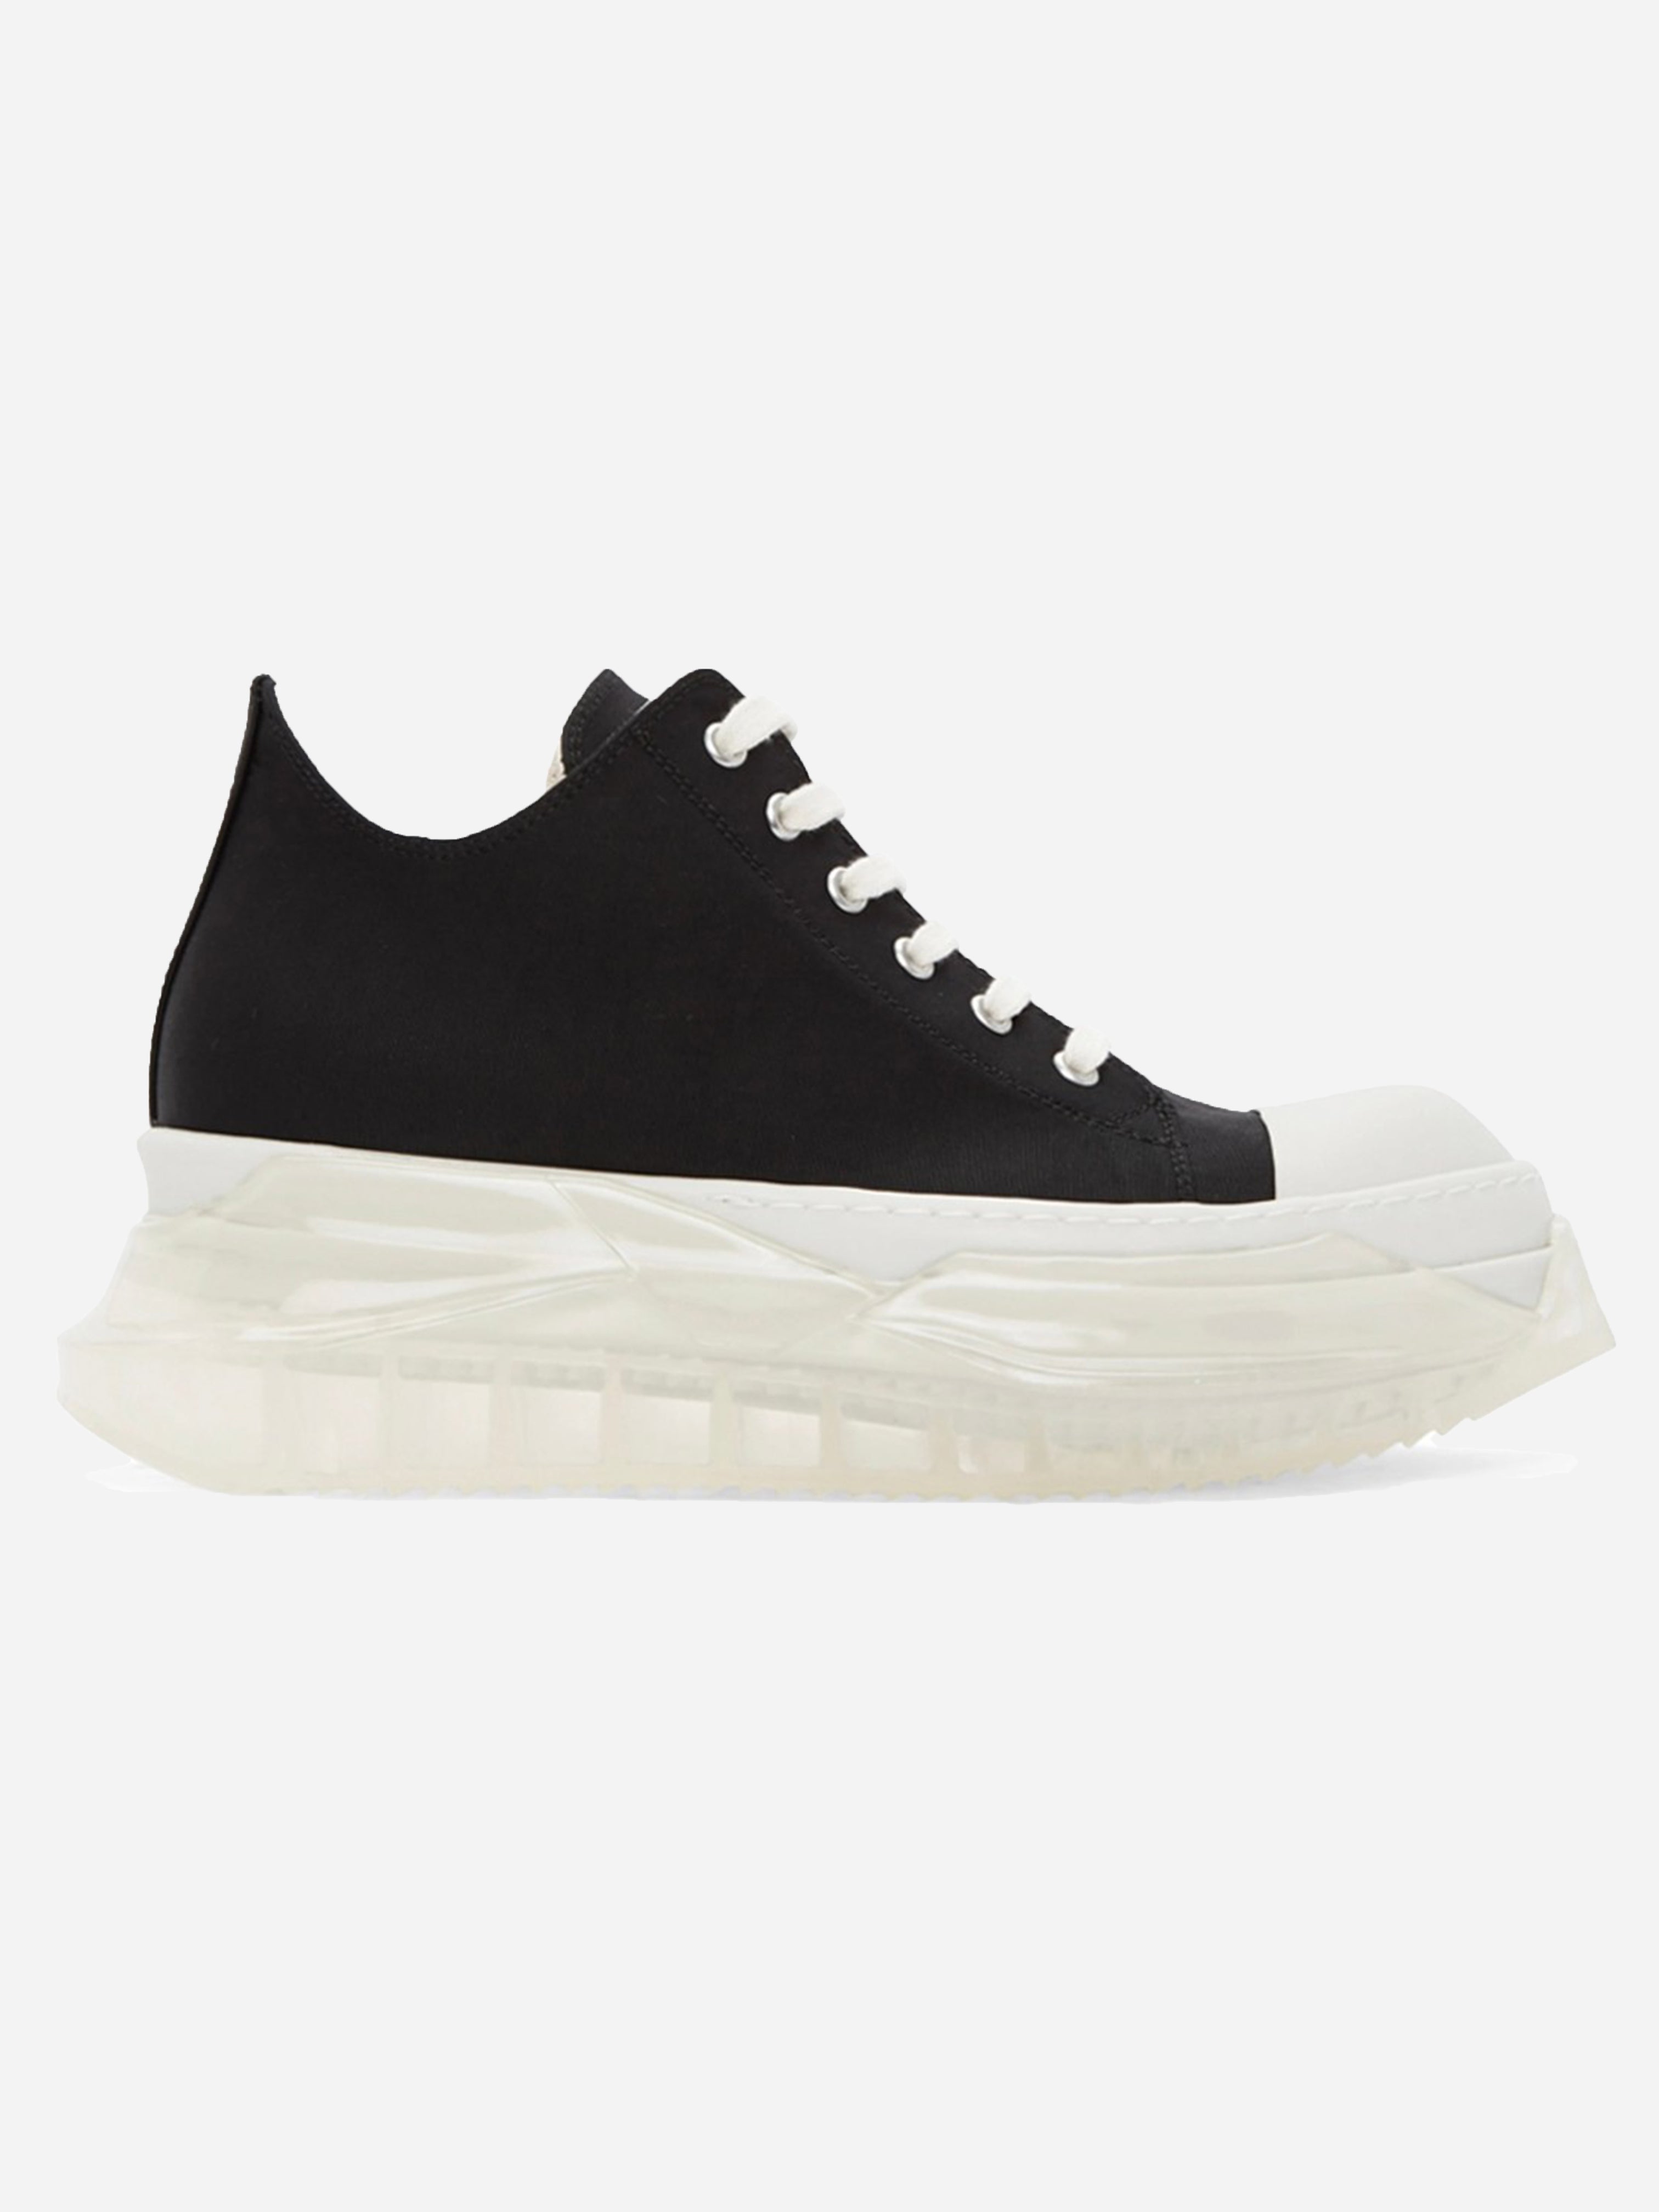 RICK OWENS DRKSHDW ABSTRACT RAMONES LOW WITH CLEAR SOLE. (40 